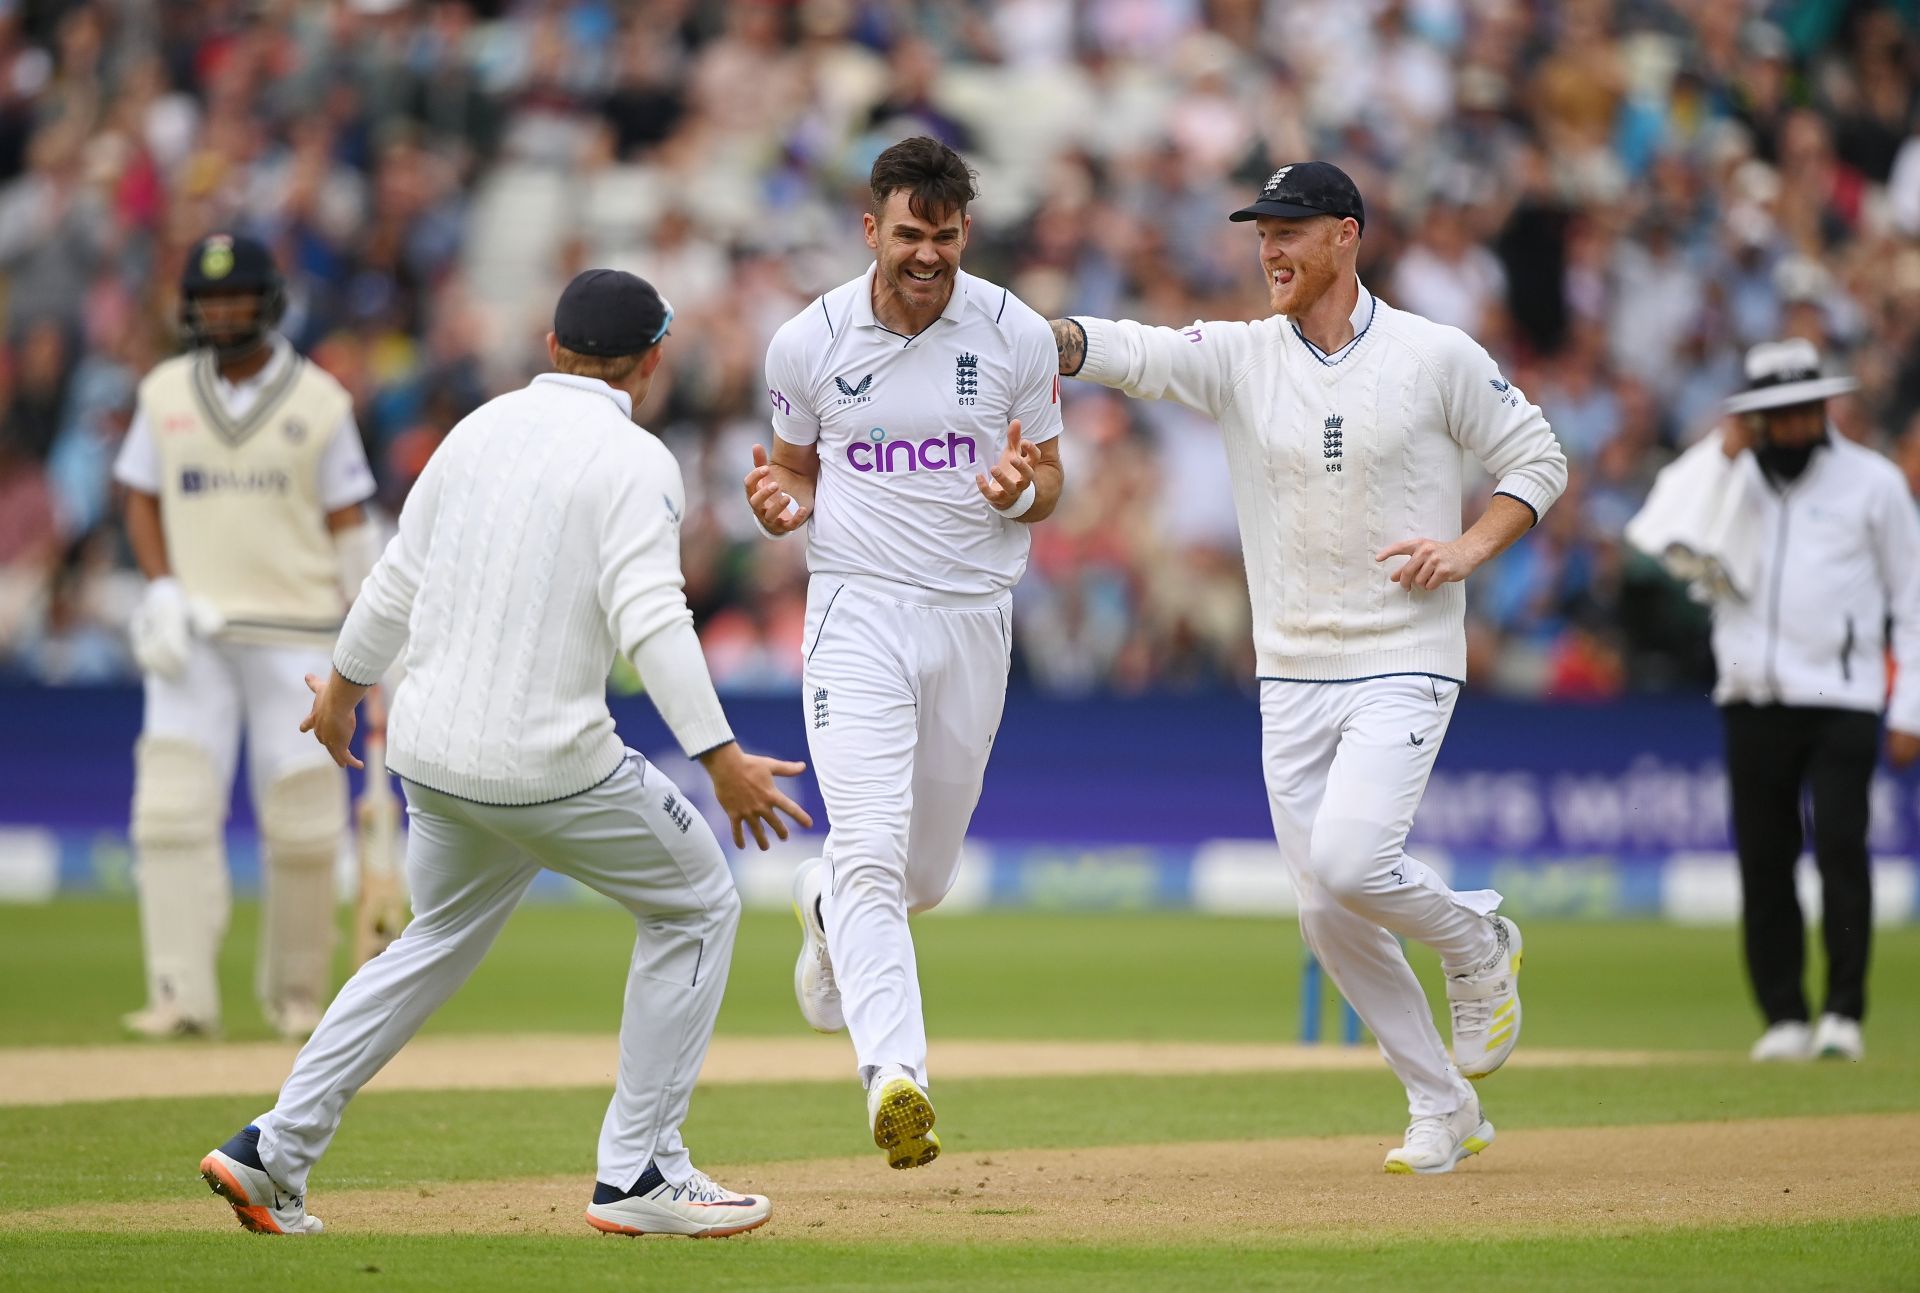 James Anderson was the pick of the English bowlers, returning with six wickets across the two innings. (Image courtesy: Getty)